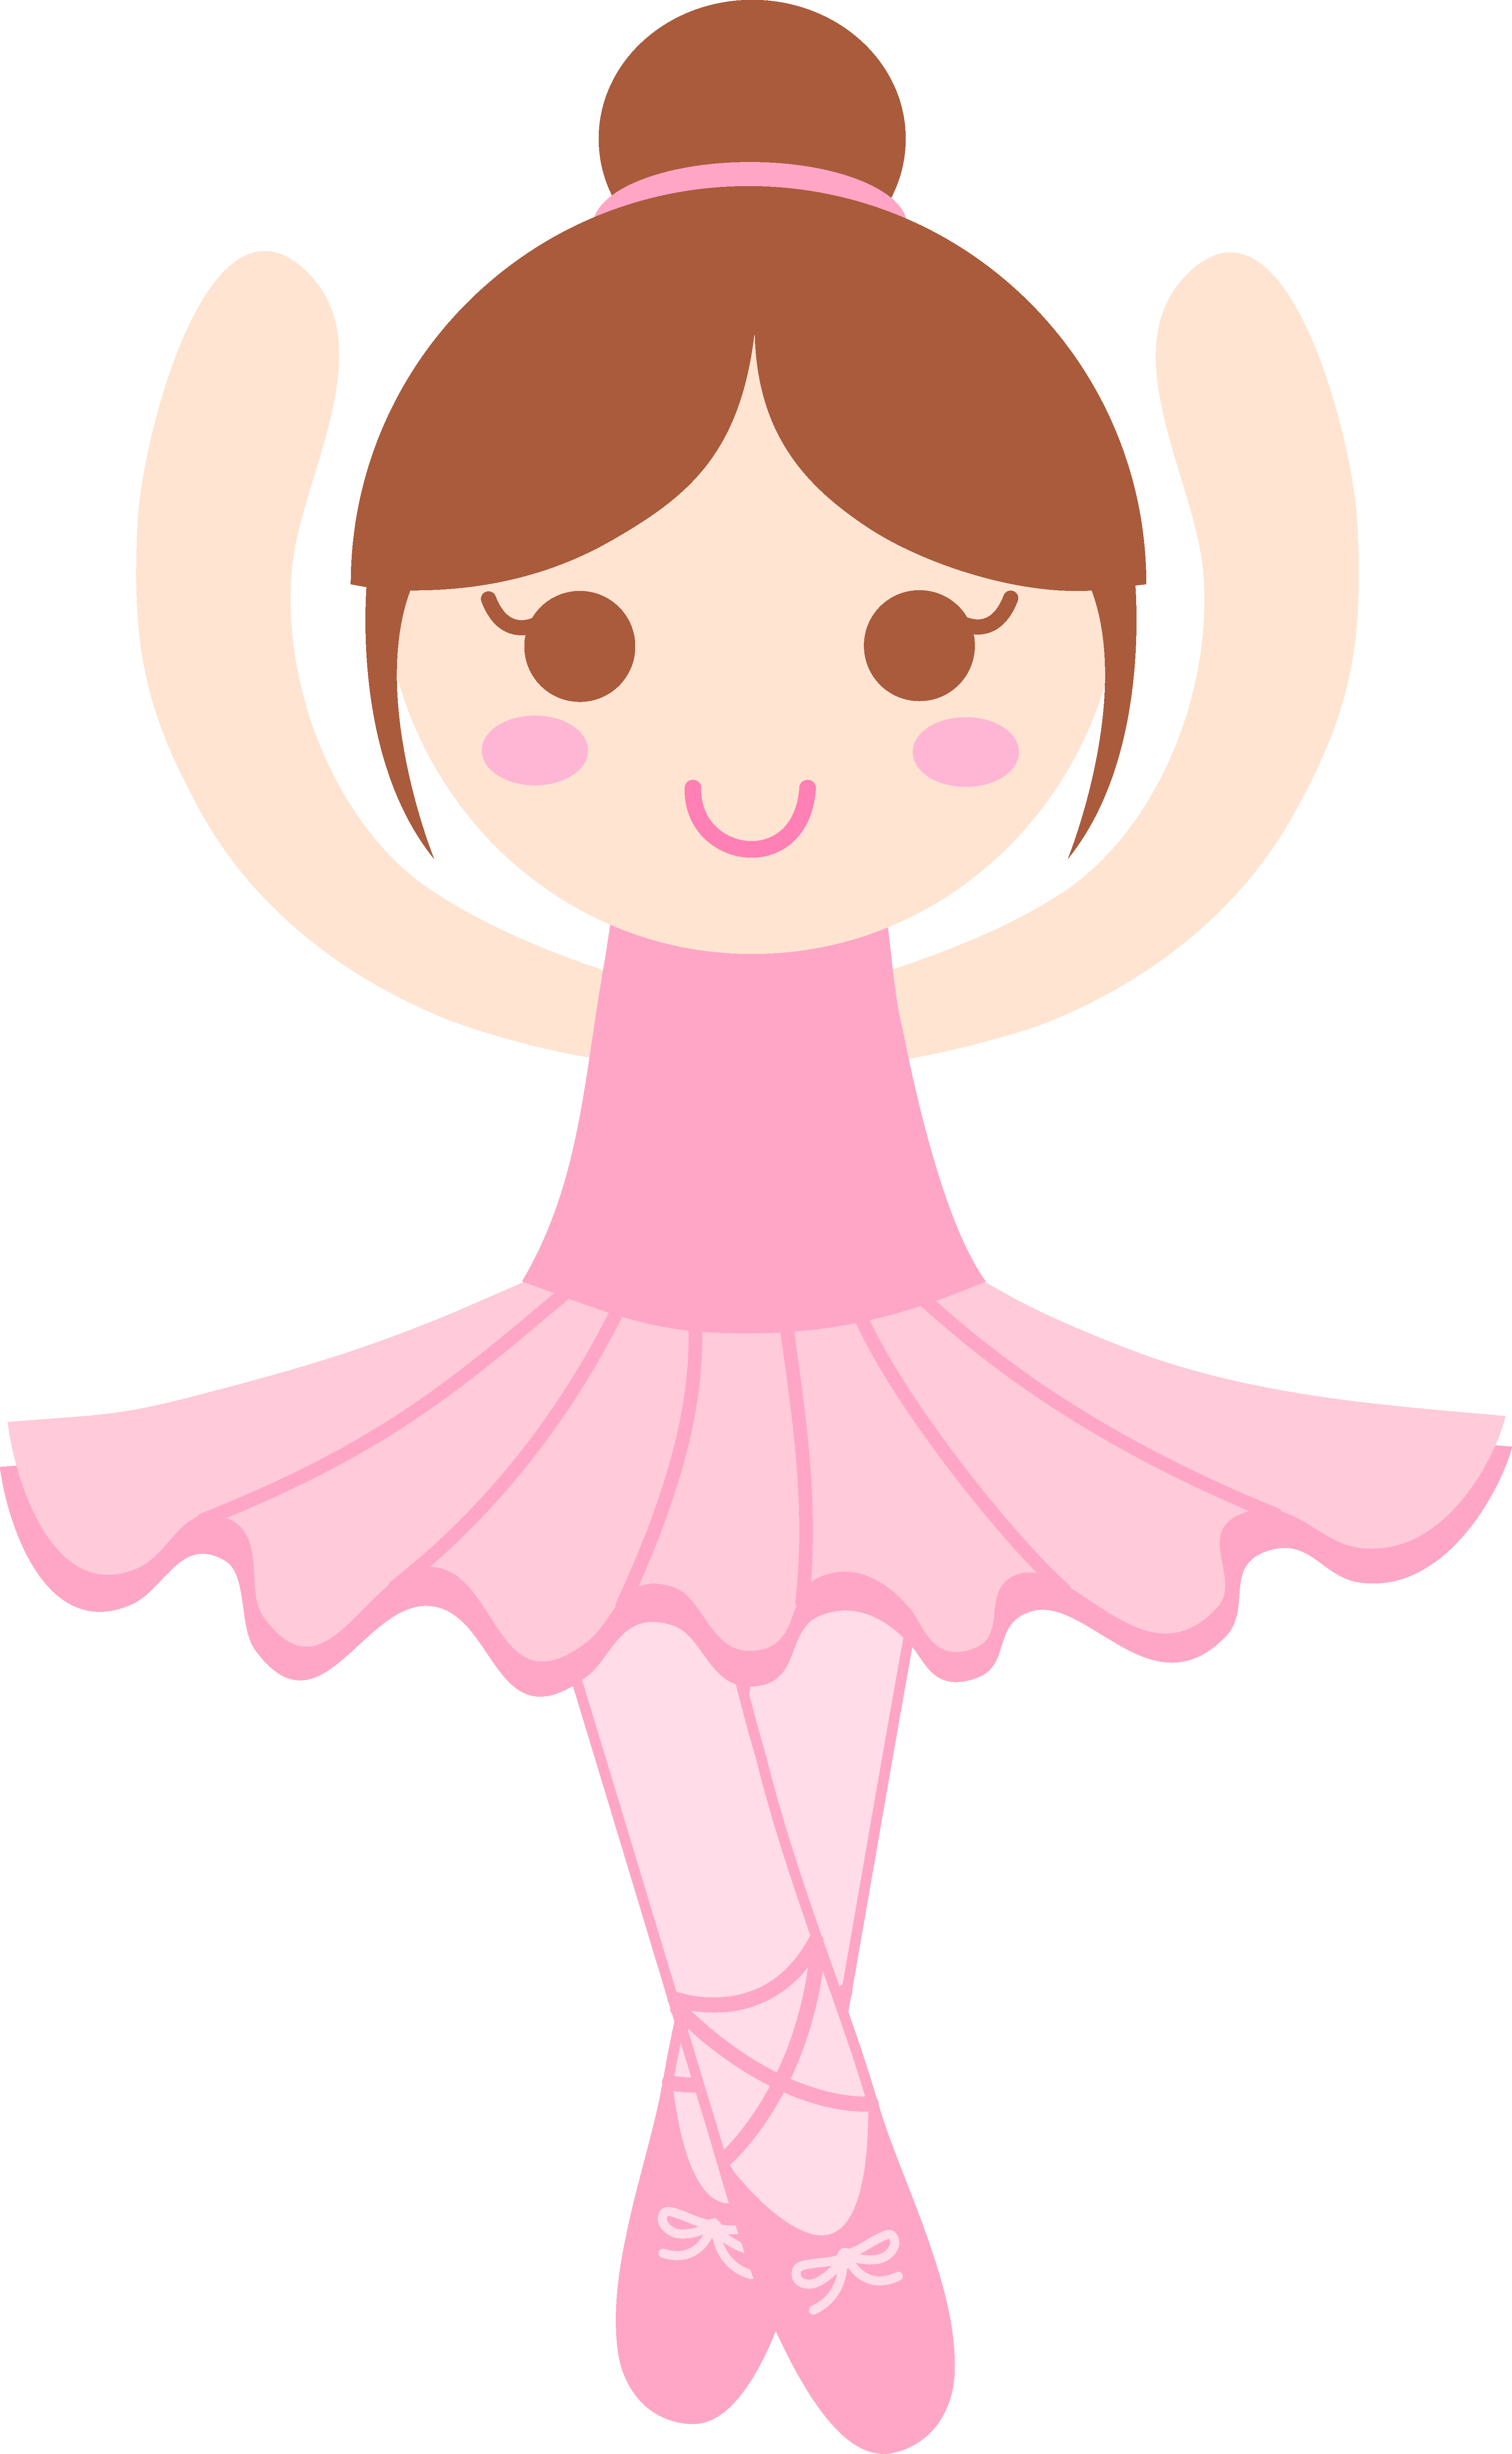 clipart free girl - photo #49